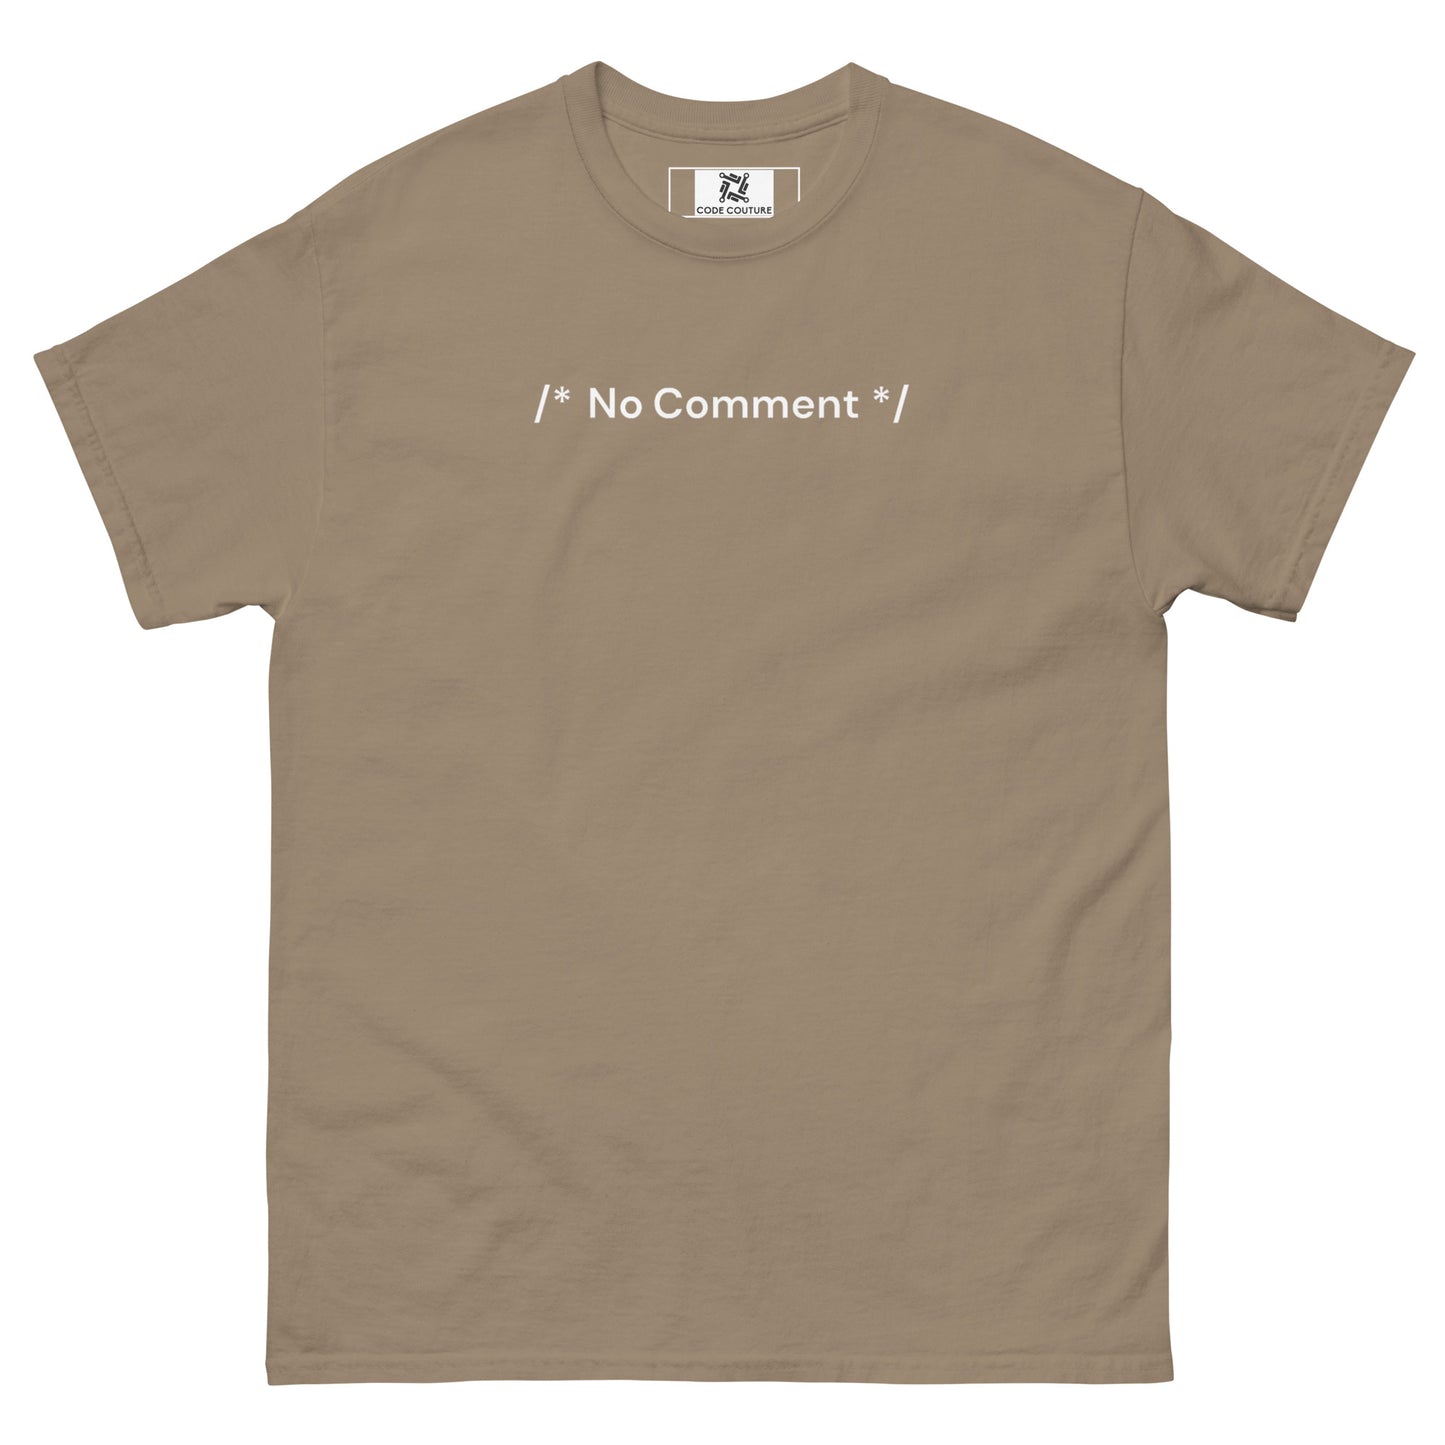 No Comment classic tee